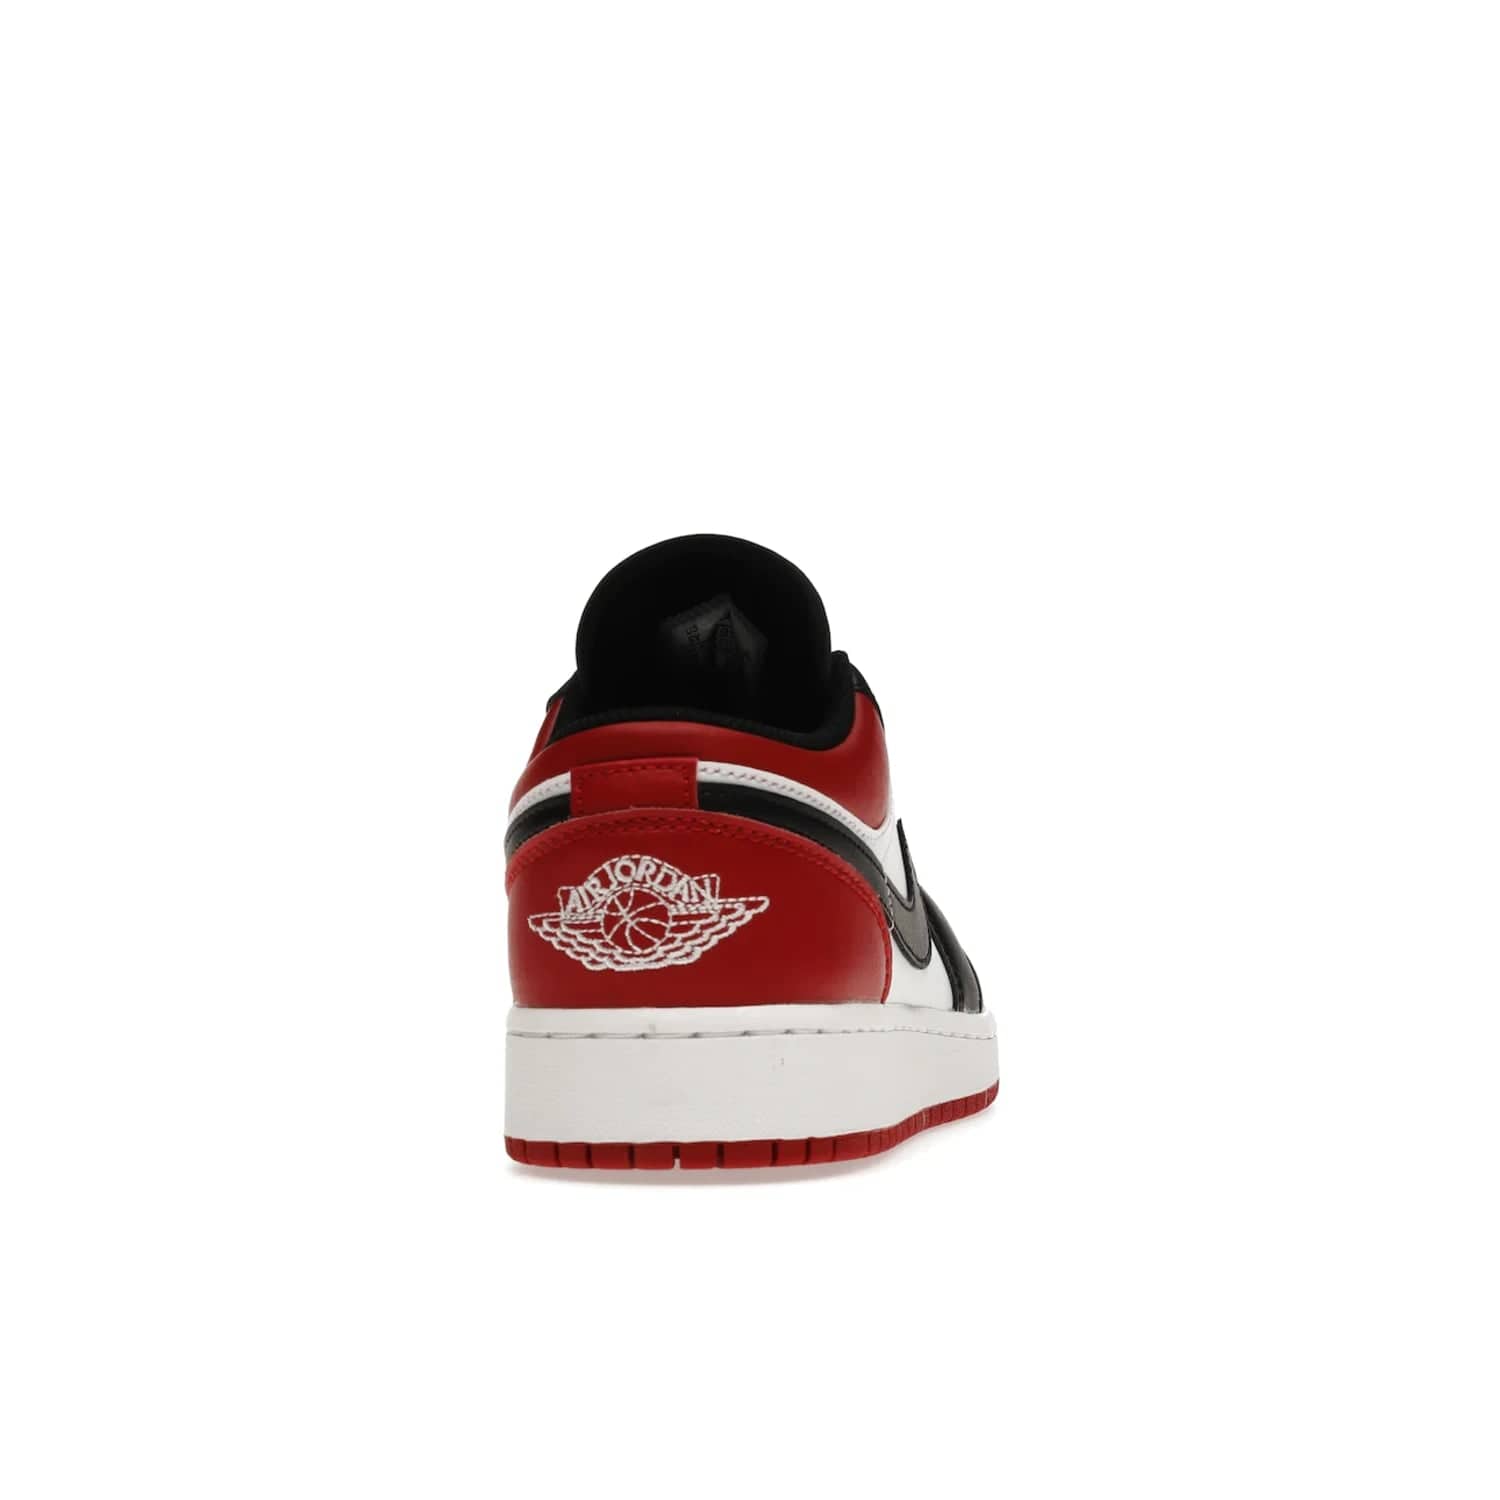 Jordan 1 Low Bred Toe (GS) - Image 29 - Only at www.BallersClubKickz.com - #
Iconic sneaker from Jordan brand with classic colorway, unique detailing & Air Jordan Wings logo. Step into the shoes of the greats with the Jordan 1 Low Bred Toe GS!